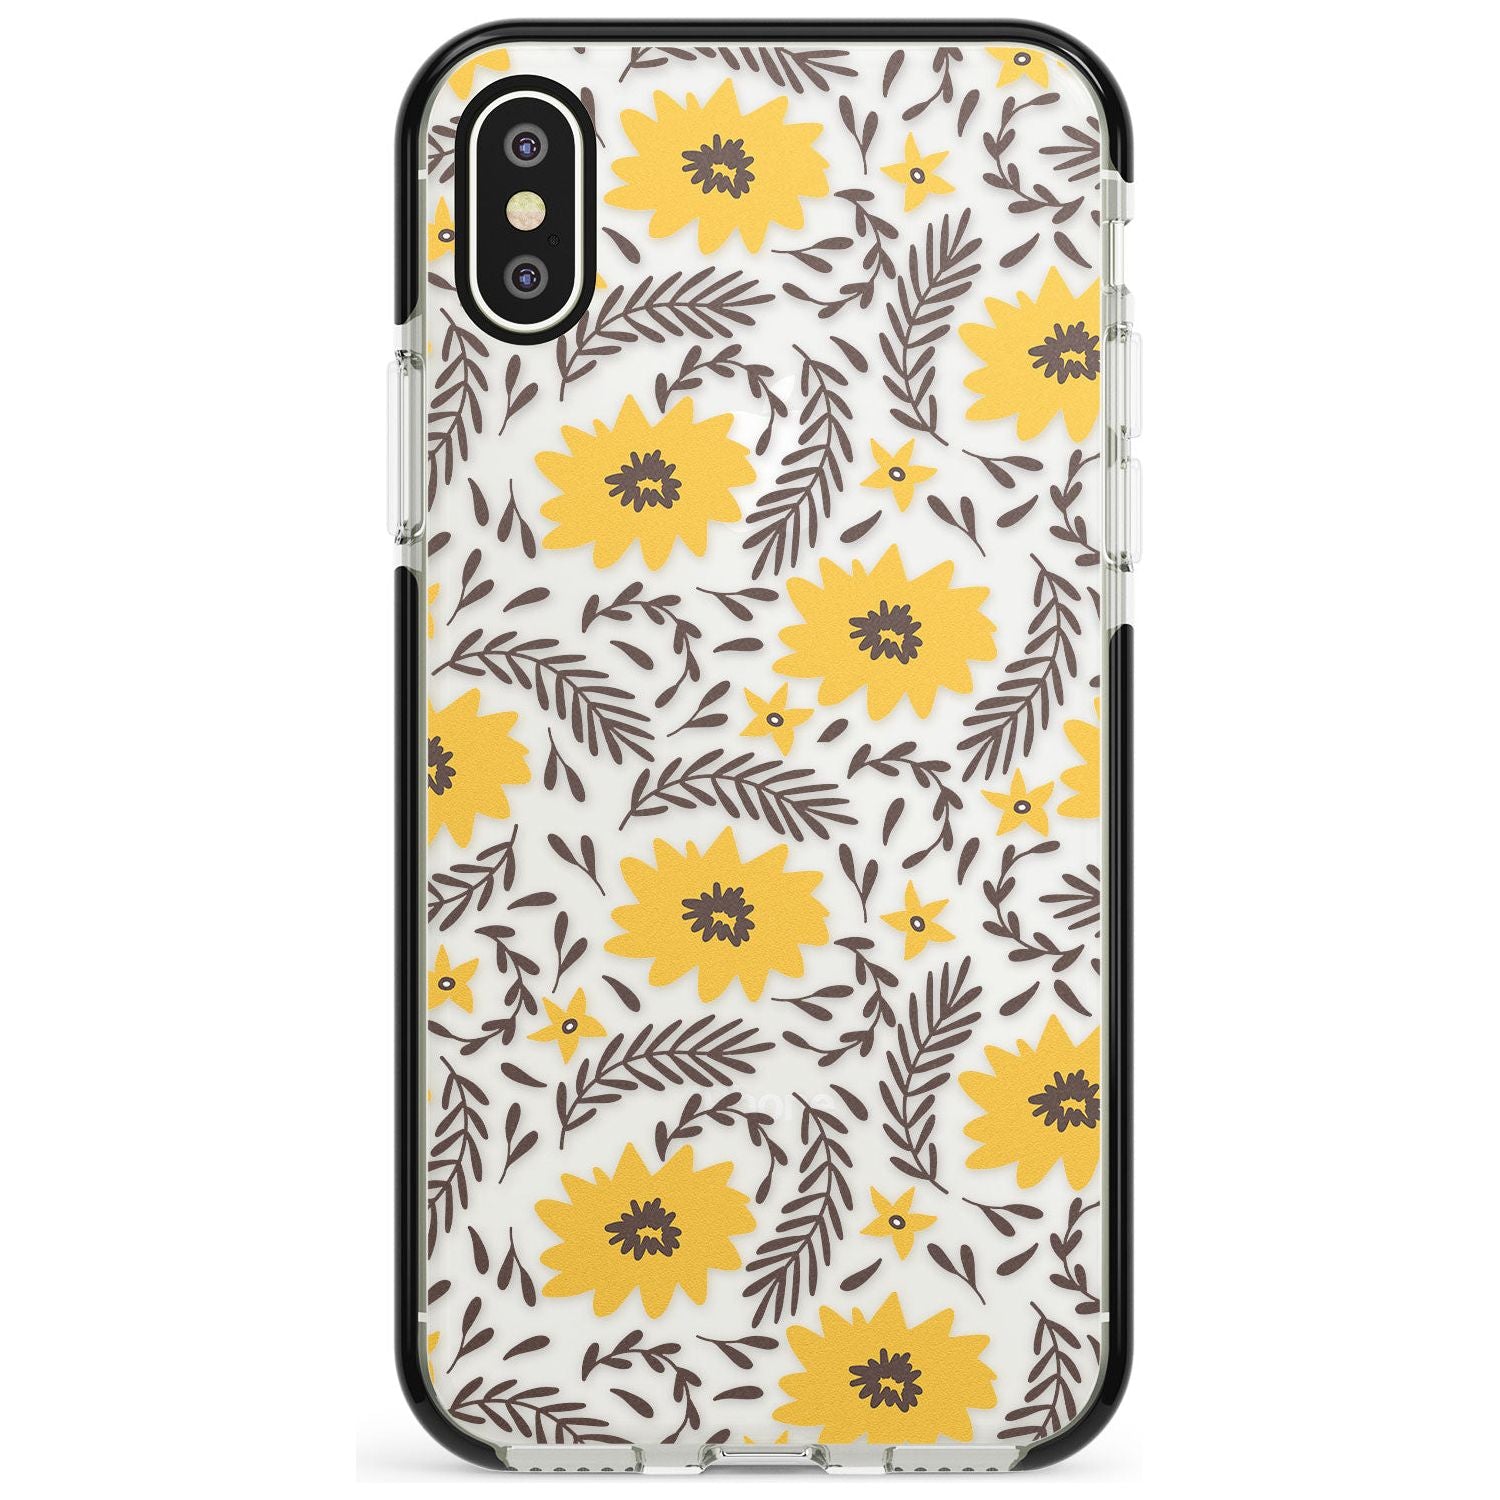 Yellow Blossoms Transparent Floral Black Impact Phone Case for iPhone X XS Max XR